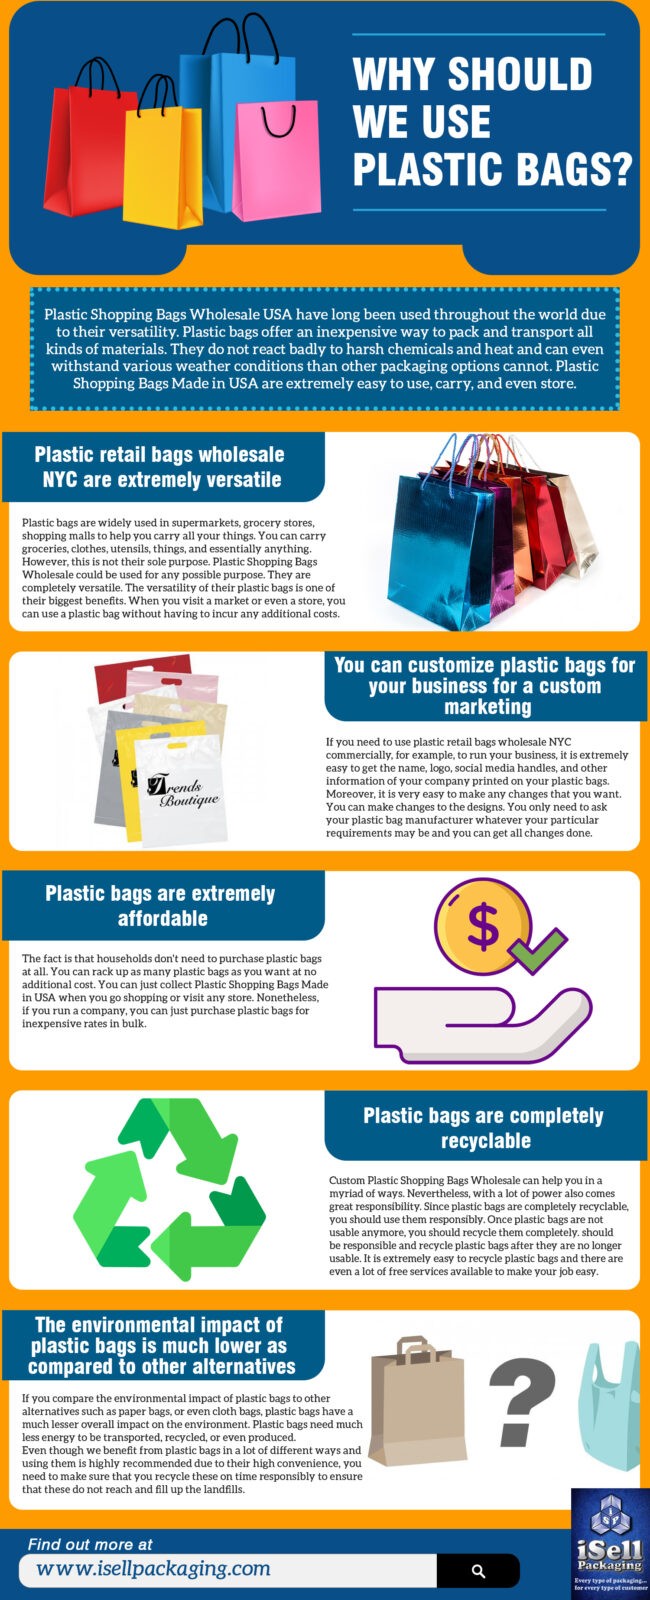 Why Should We Use Plastic Bags? | Benefits of Plastic Bags